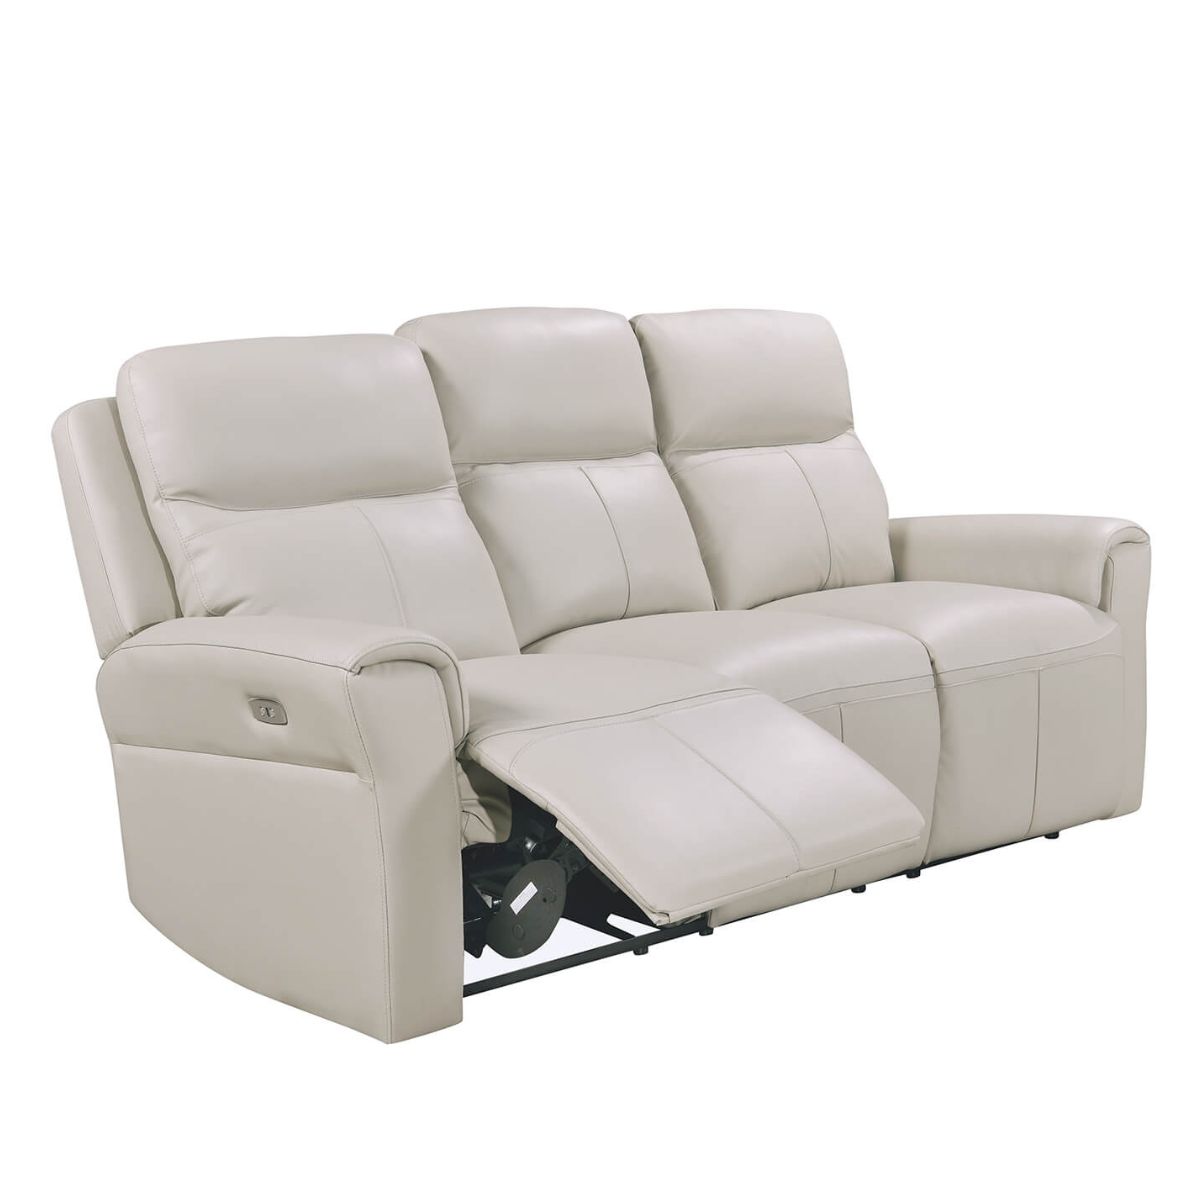 Rosslare Leather 3 Seater Electric Recliner Beige - 2